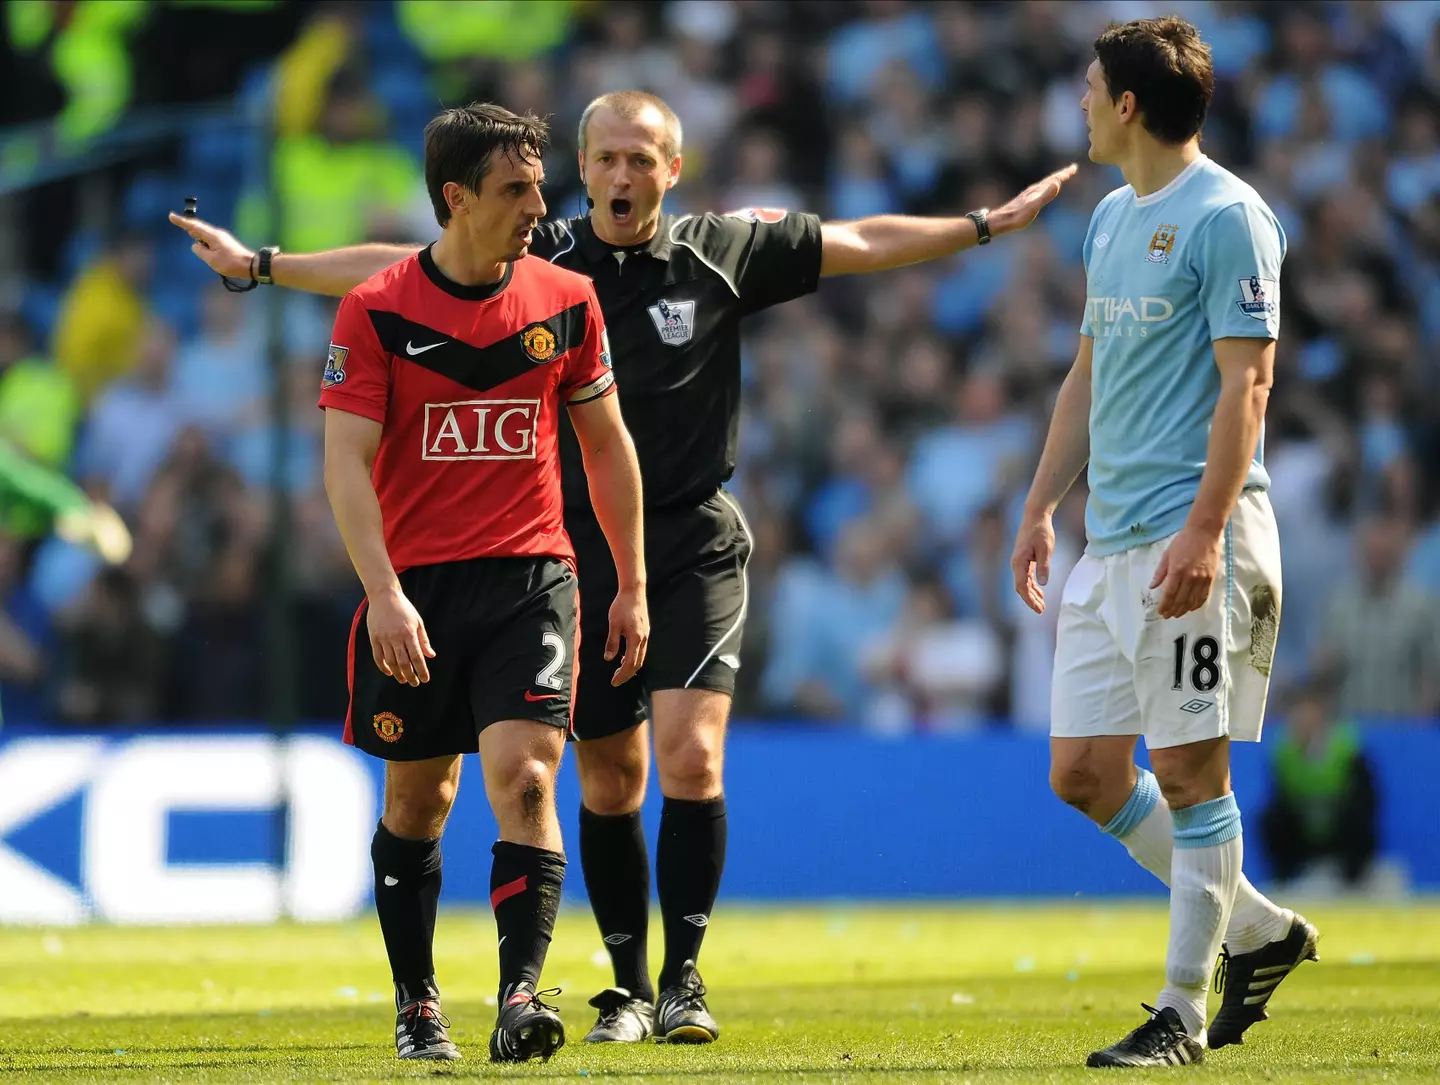 Neville in action against Manchester City back in 2010. (Image